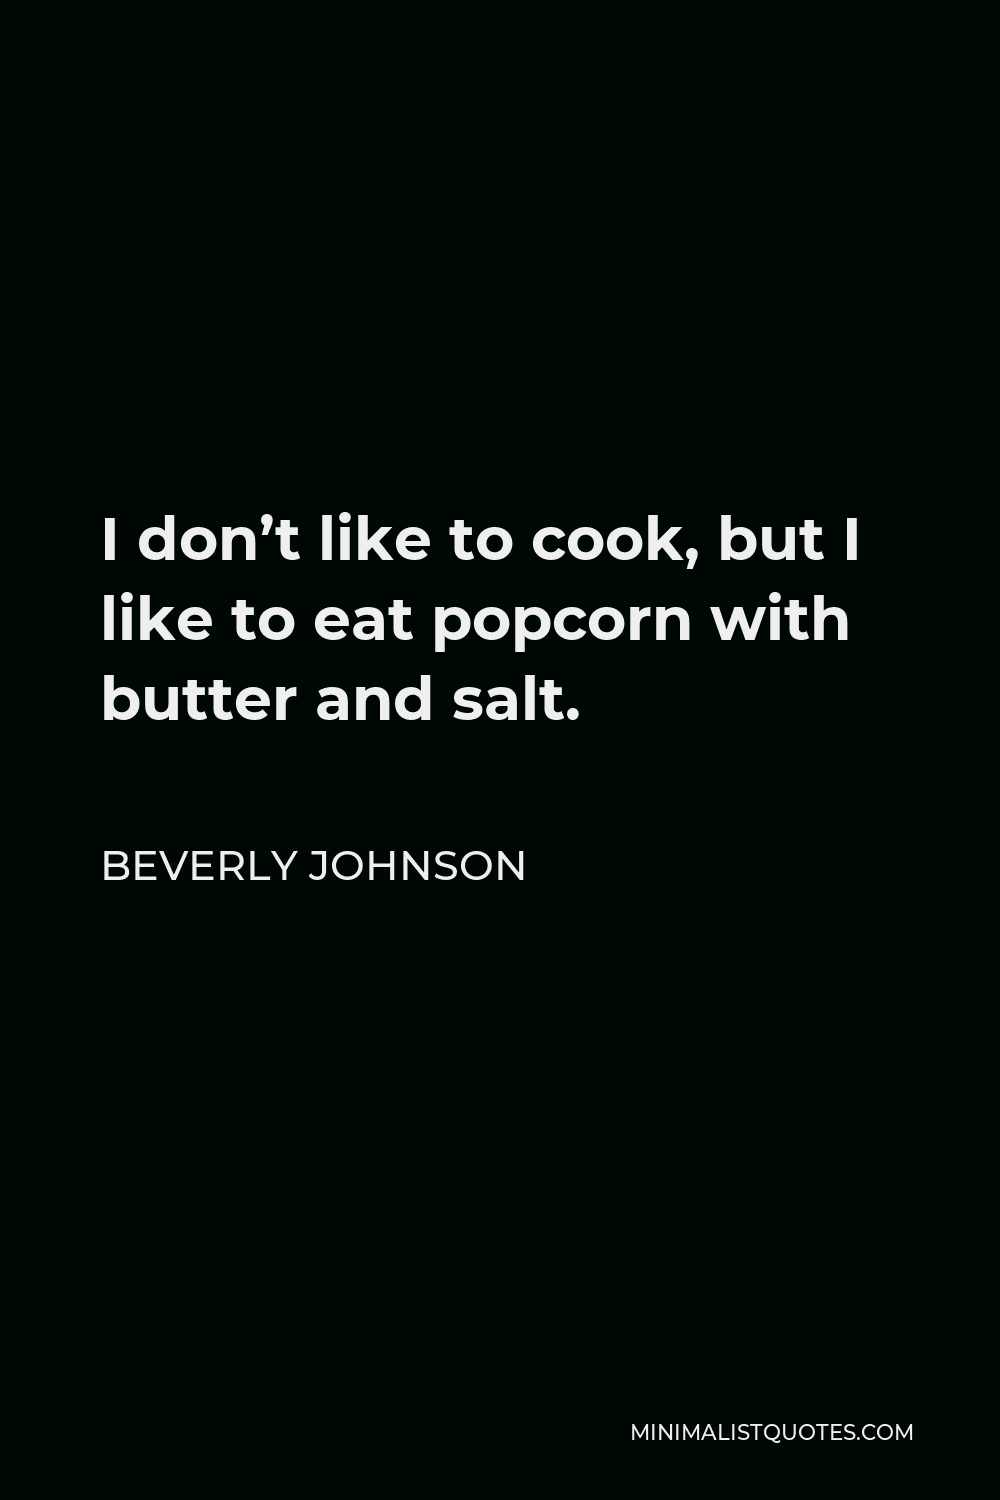 Beverly Johnson Quote - I don’t like to cook, but I like to eat popcorn with butter and salt.